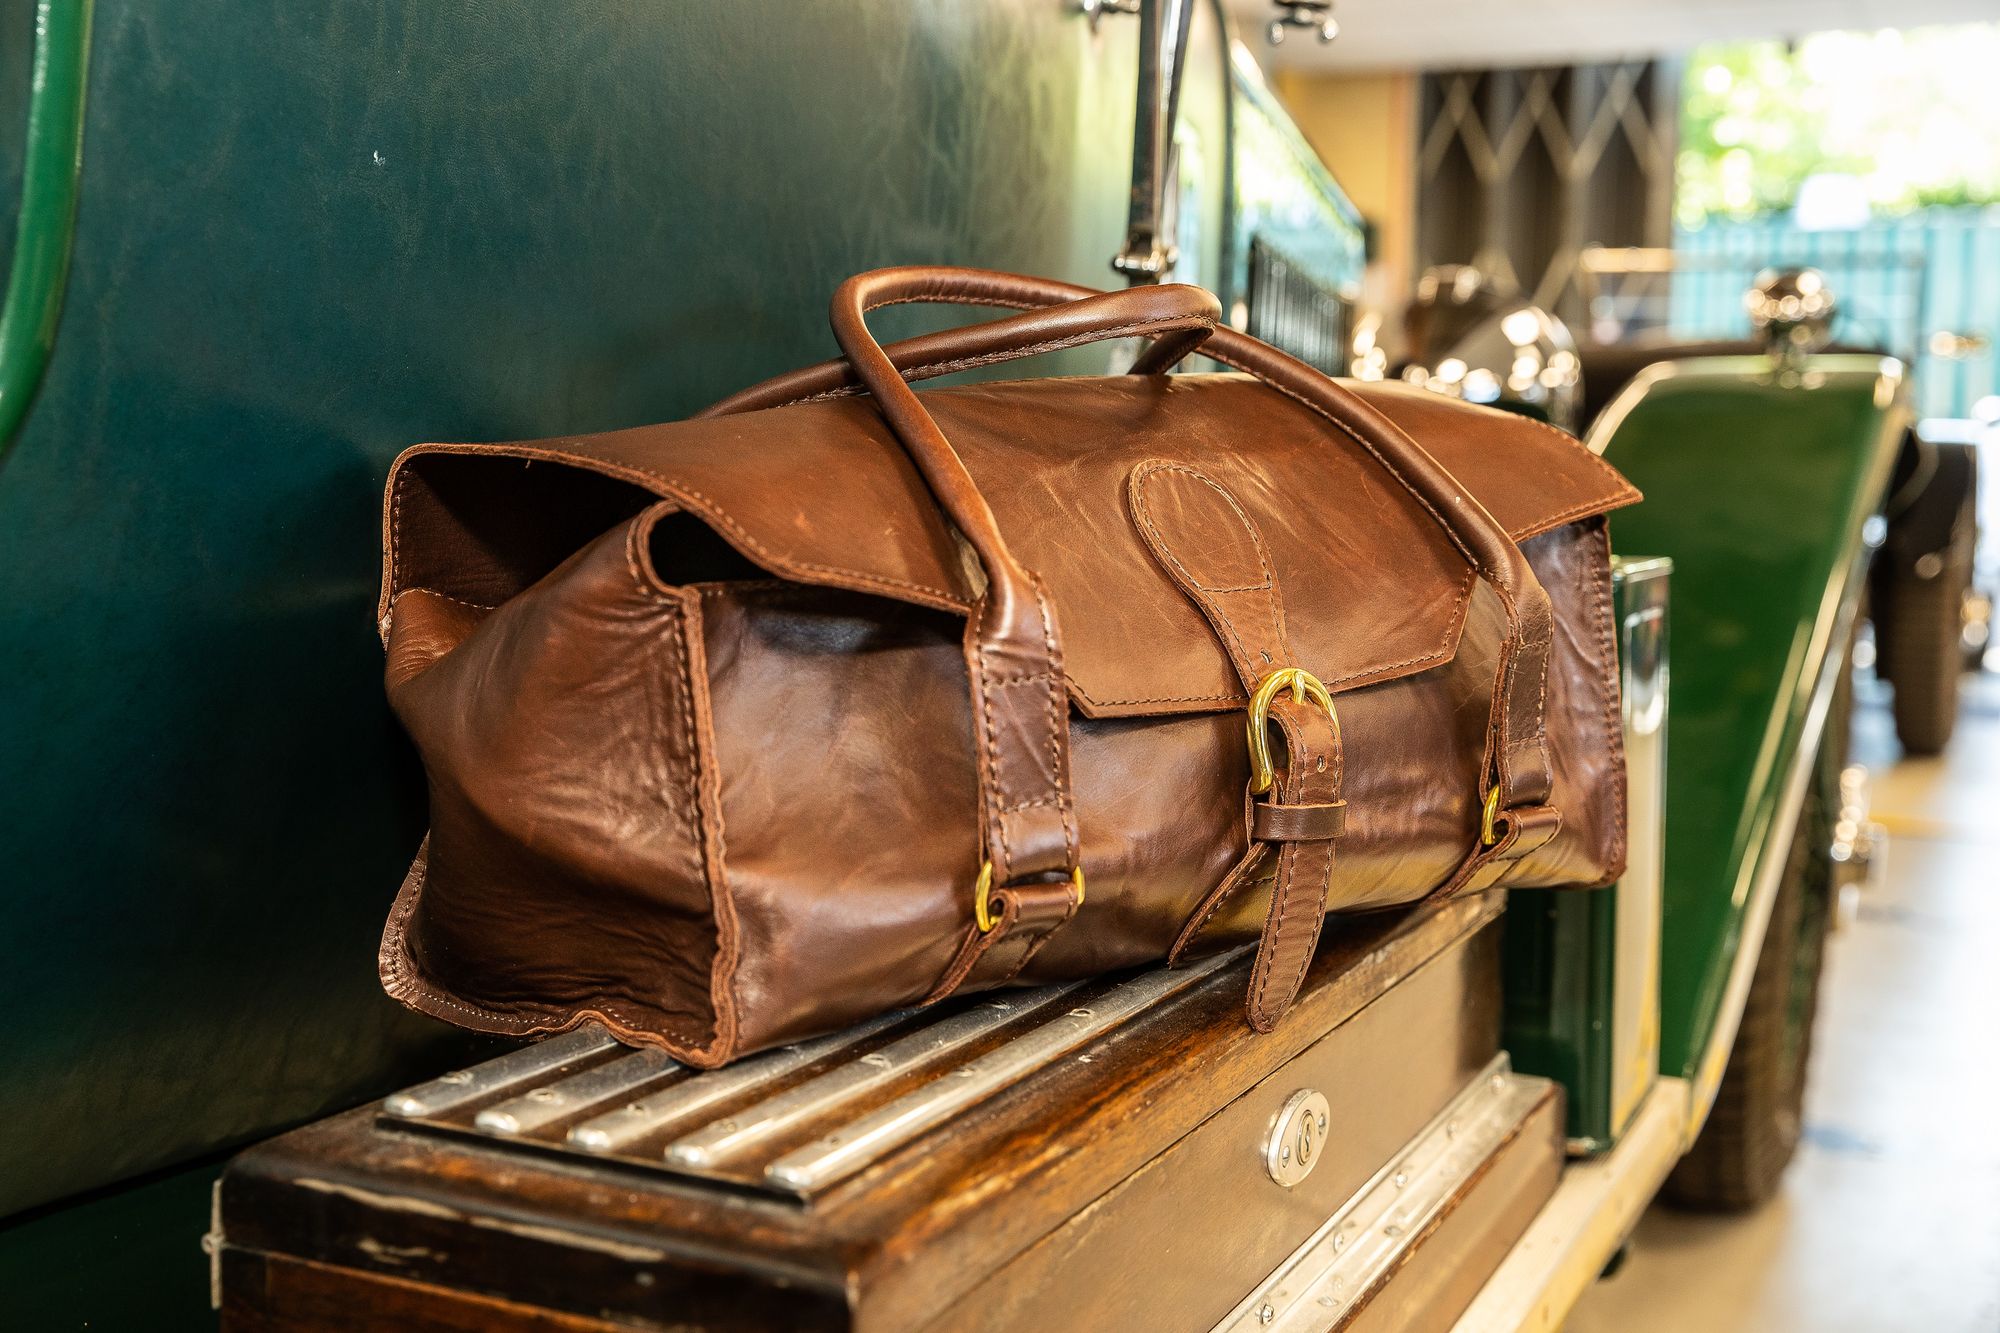 Vintage Bentley Tool Bag - Now Available